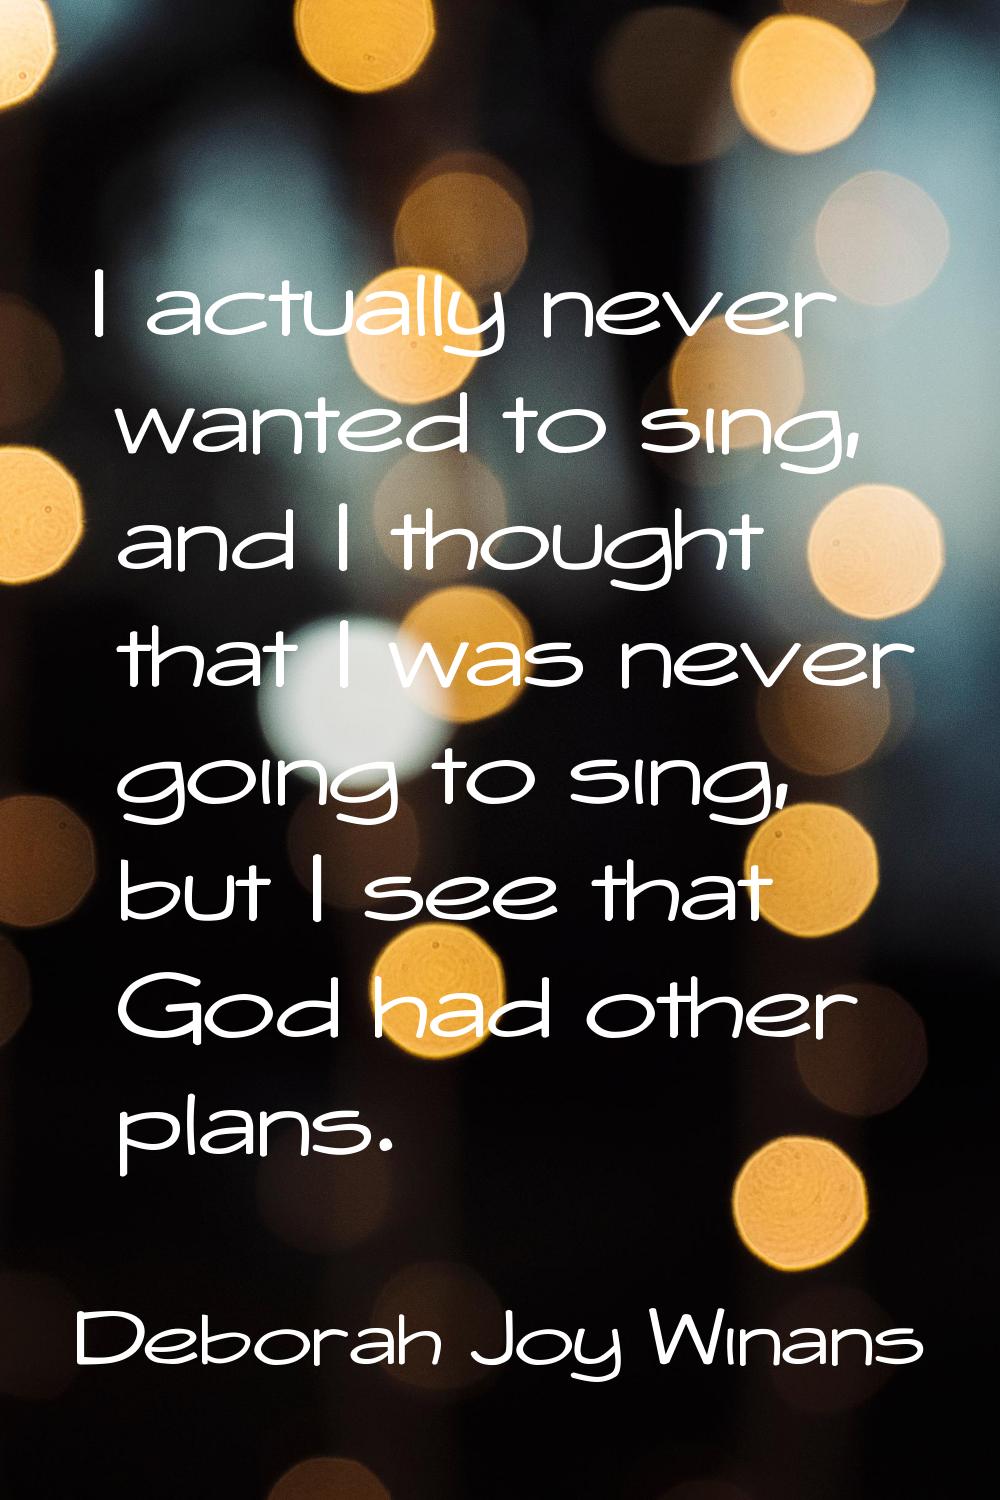 I actually never wanted to sing, and I thought that I was never going to sing, but I see that God h